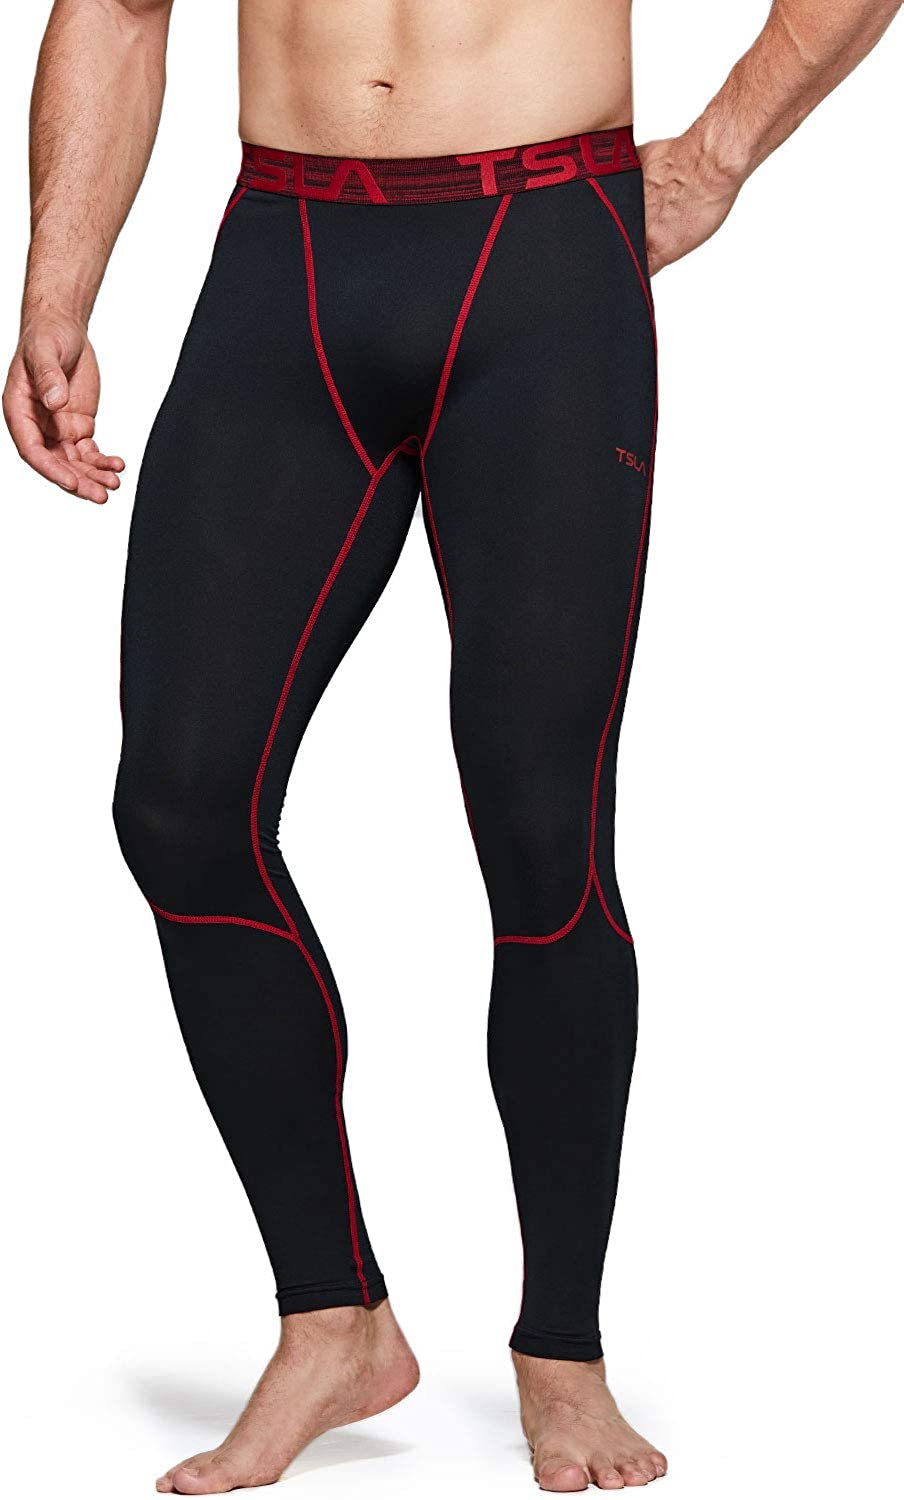 TSLA Mens Compression Pants Workout Running Baselayer Active Cool Dry Leggings Tights mup39 A Active - Black & Red XX-Large